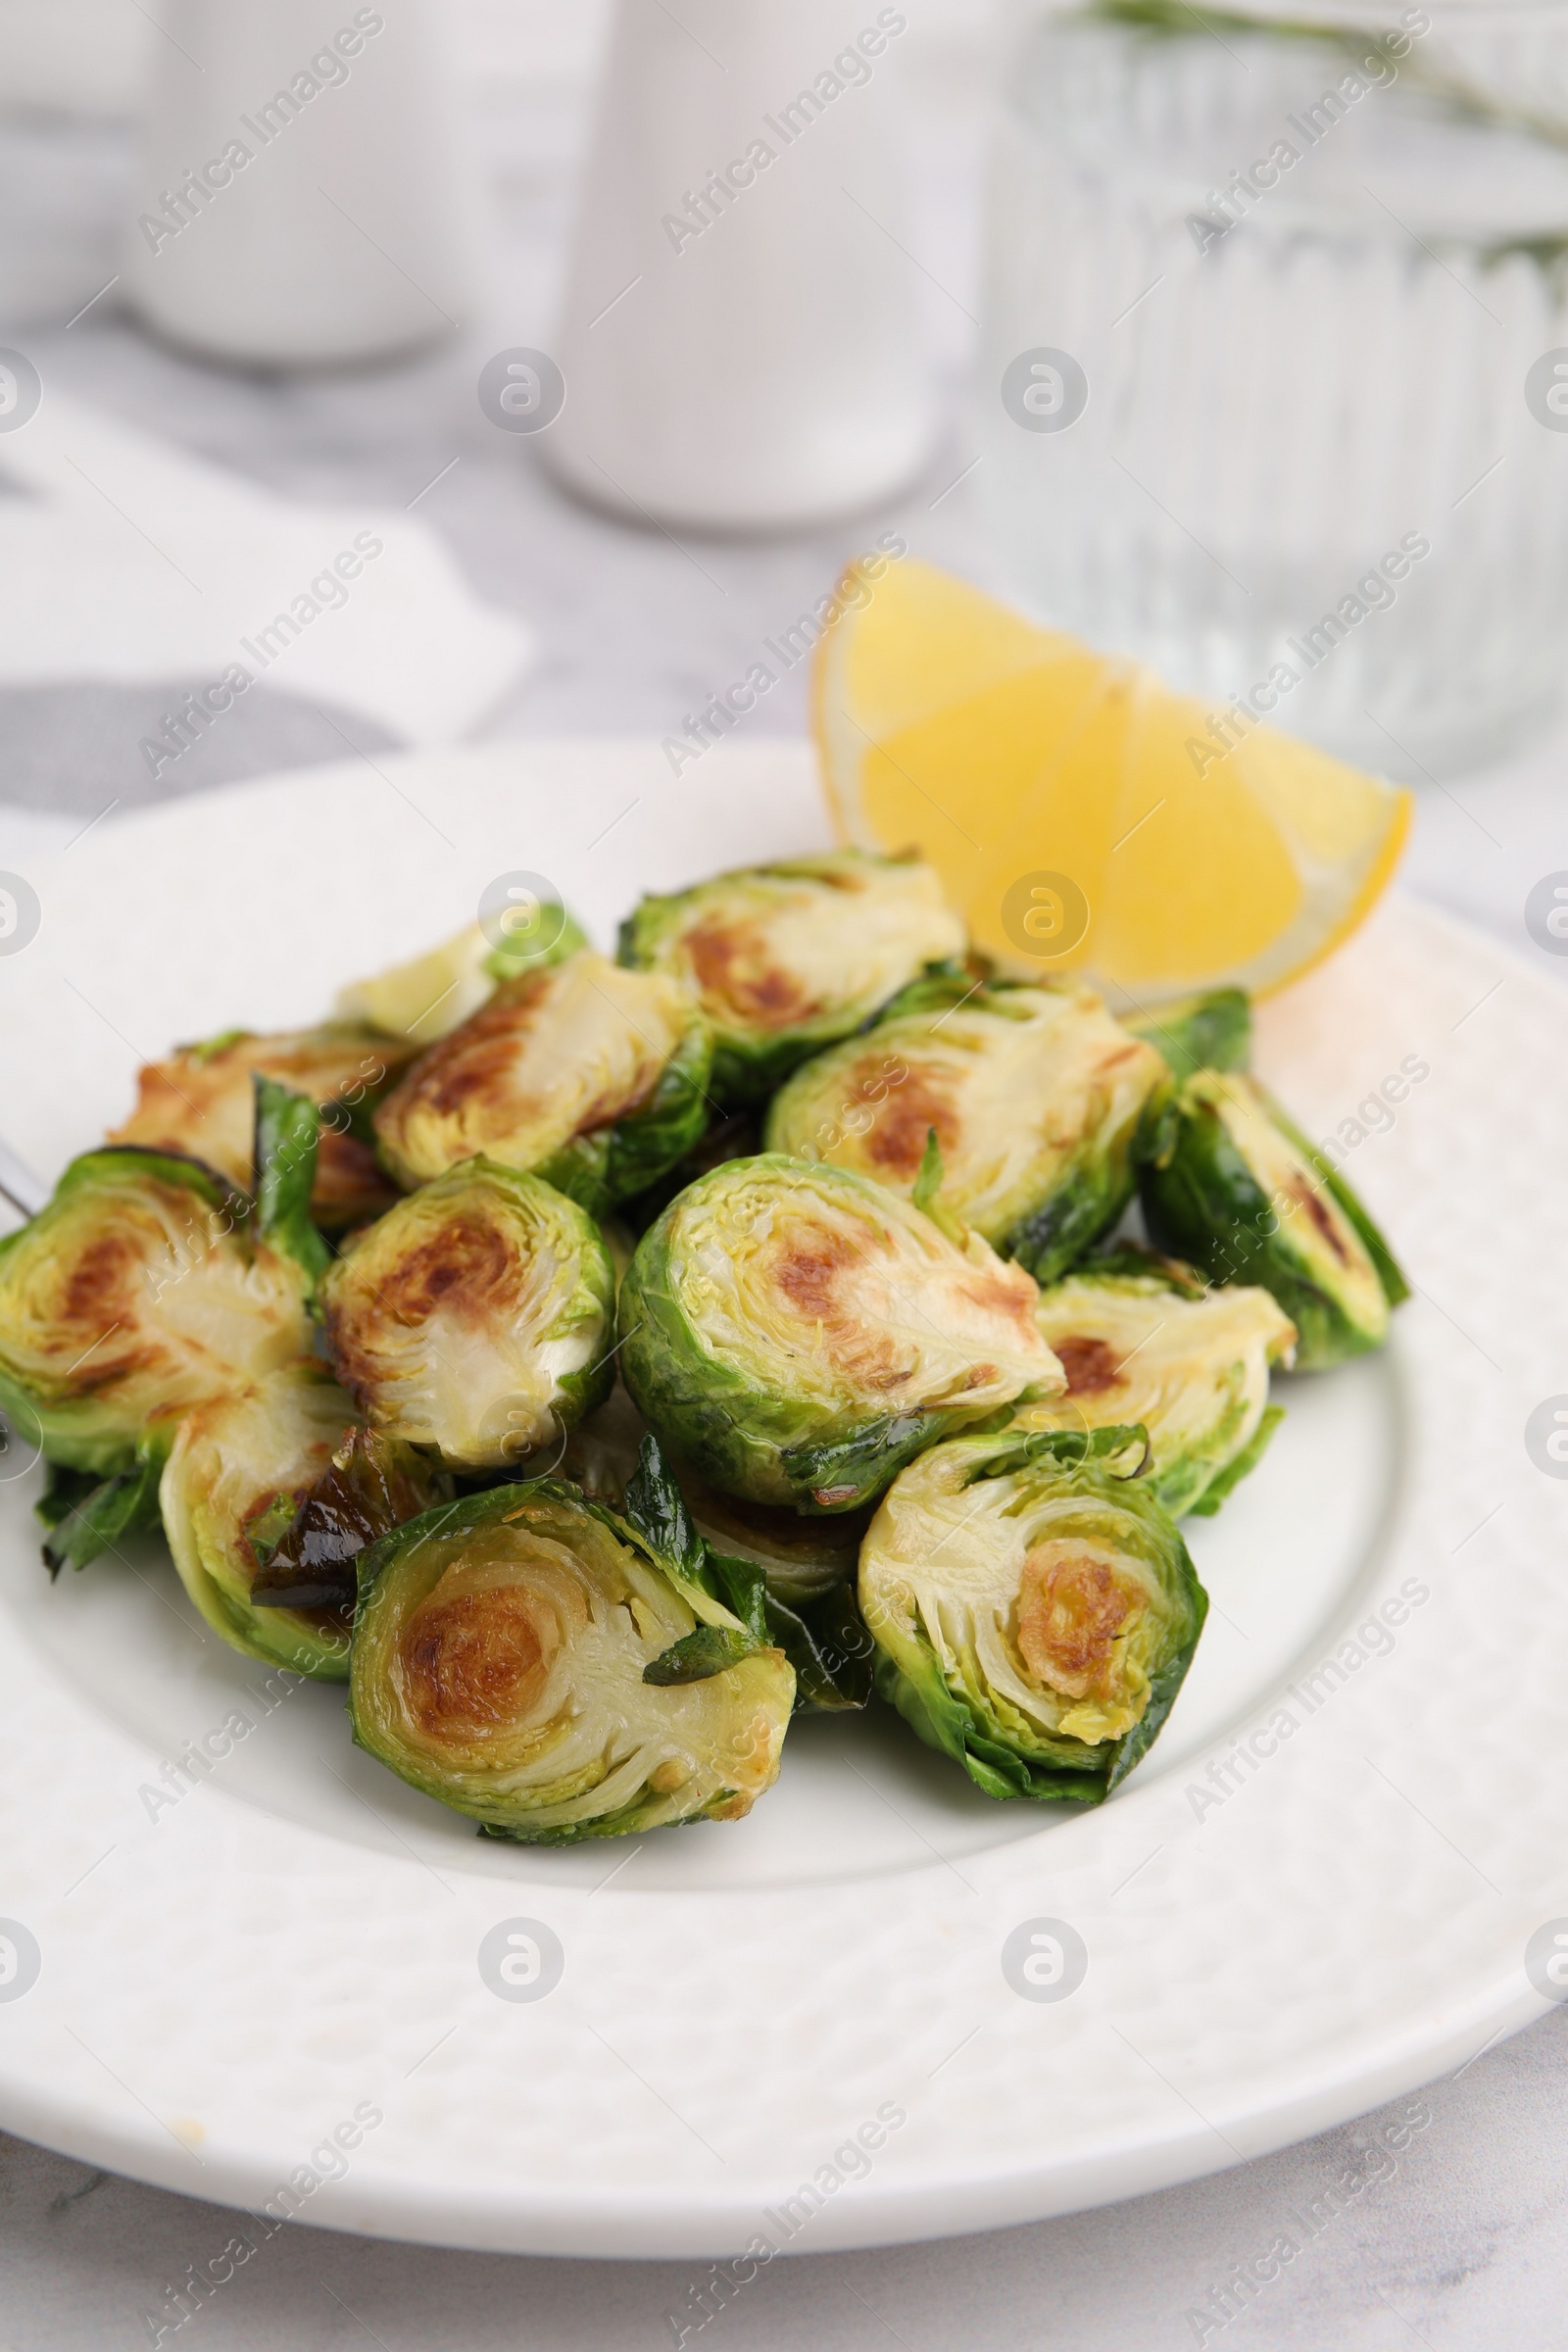 Photo of Delicious roasted Brussels sprouts and slice of lemon on table, closeup